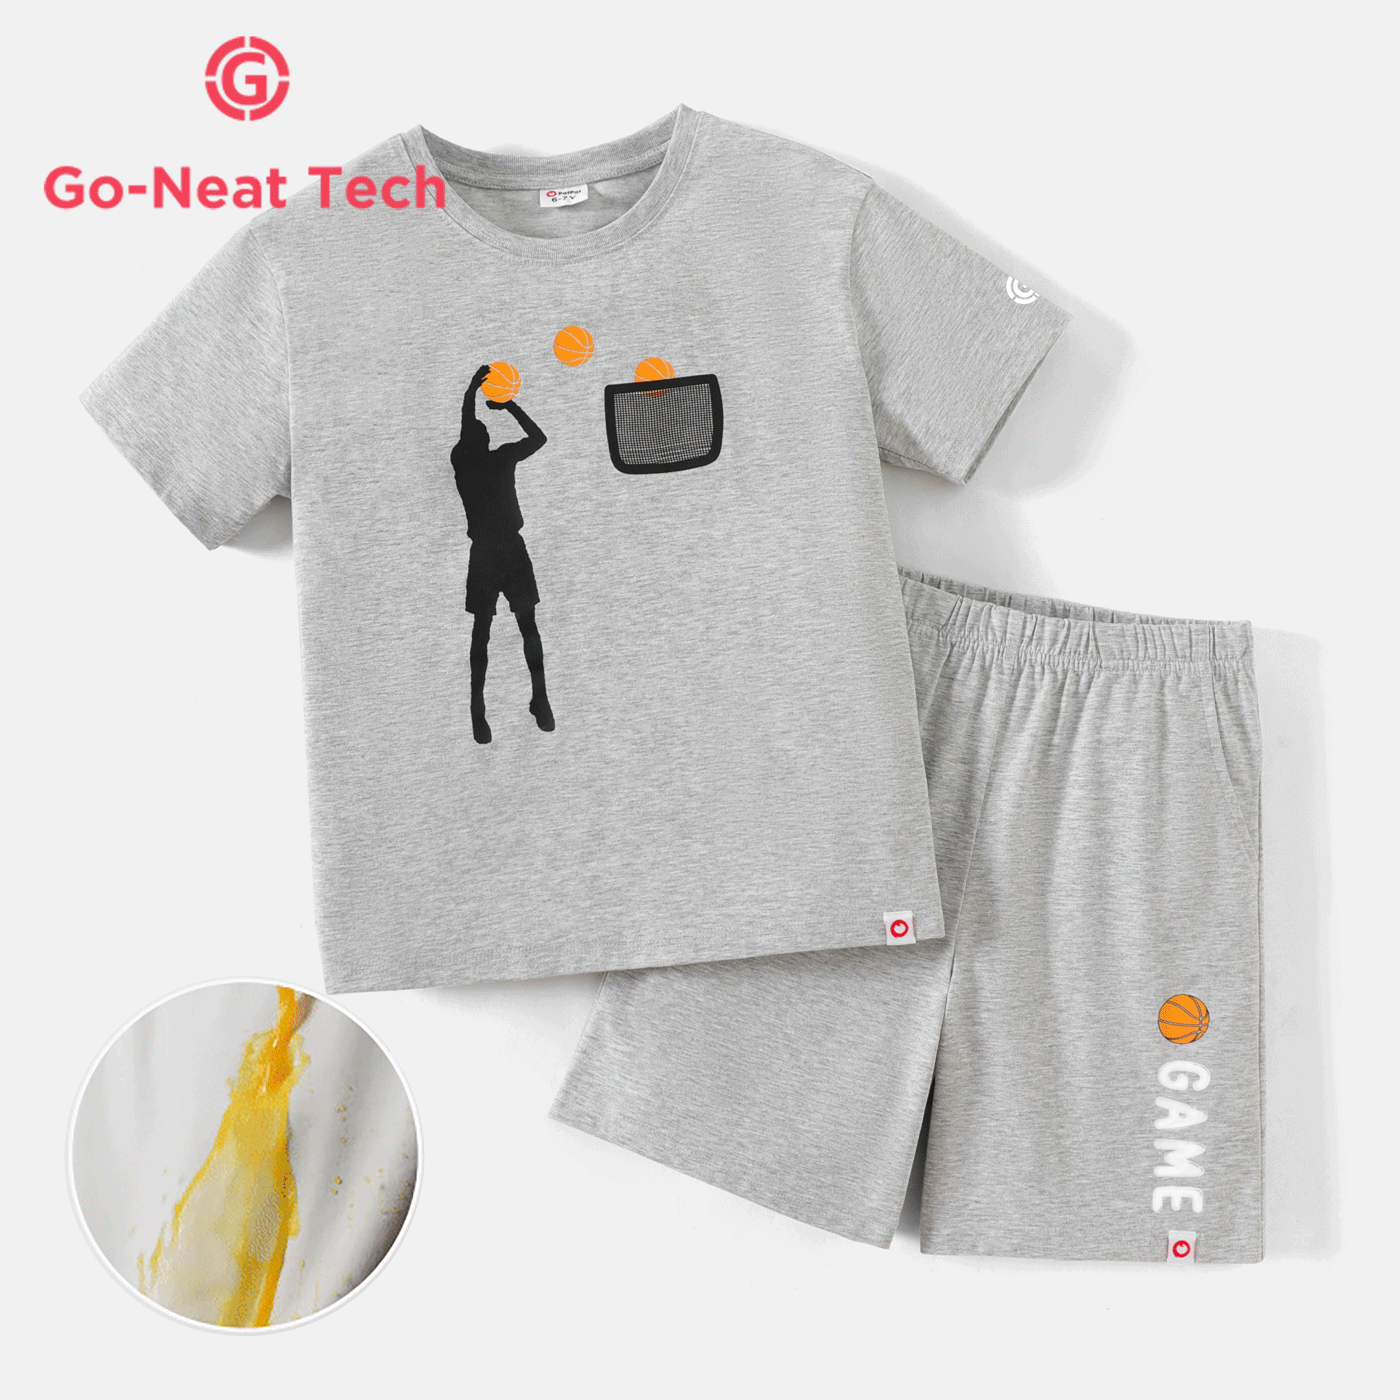 [5Y-14Y] Go-Neat Water Repellent and Stain Resistant 2pcs Kid Boy Basketball Figure Print Tee and Shorts Set